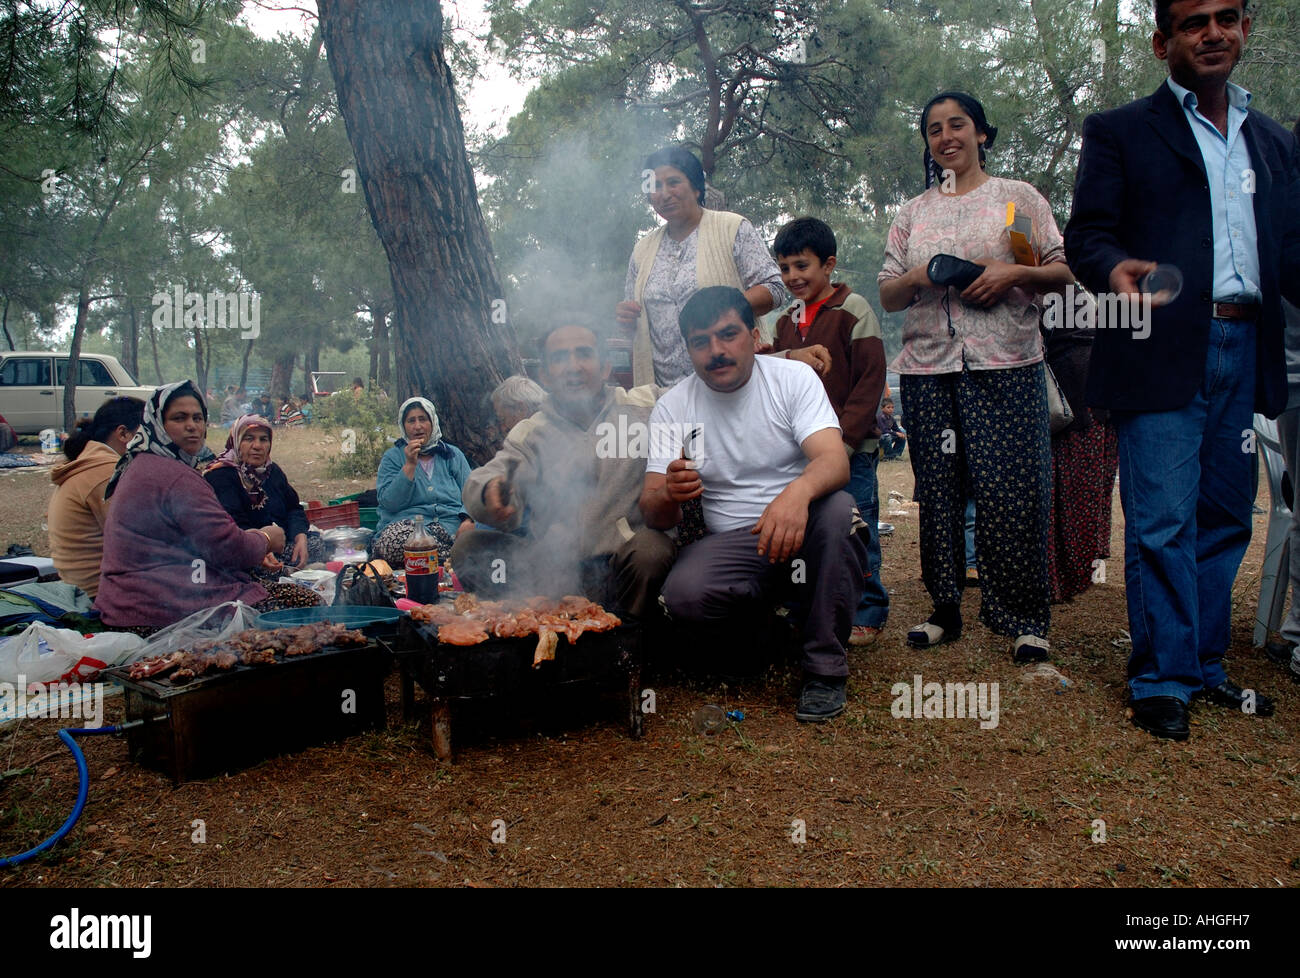 Mother's Day and national picnic day celebration in the forest near Ksantos Southern Turkey. Stock Photo